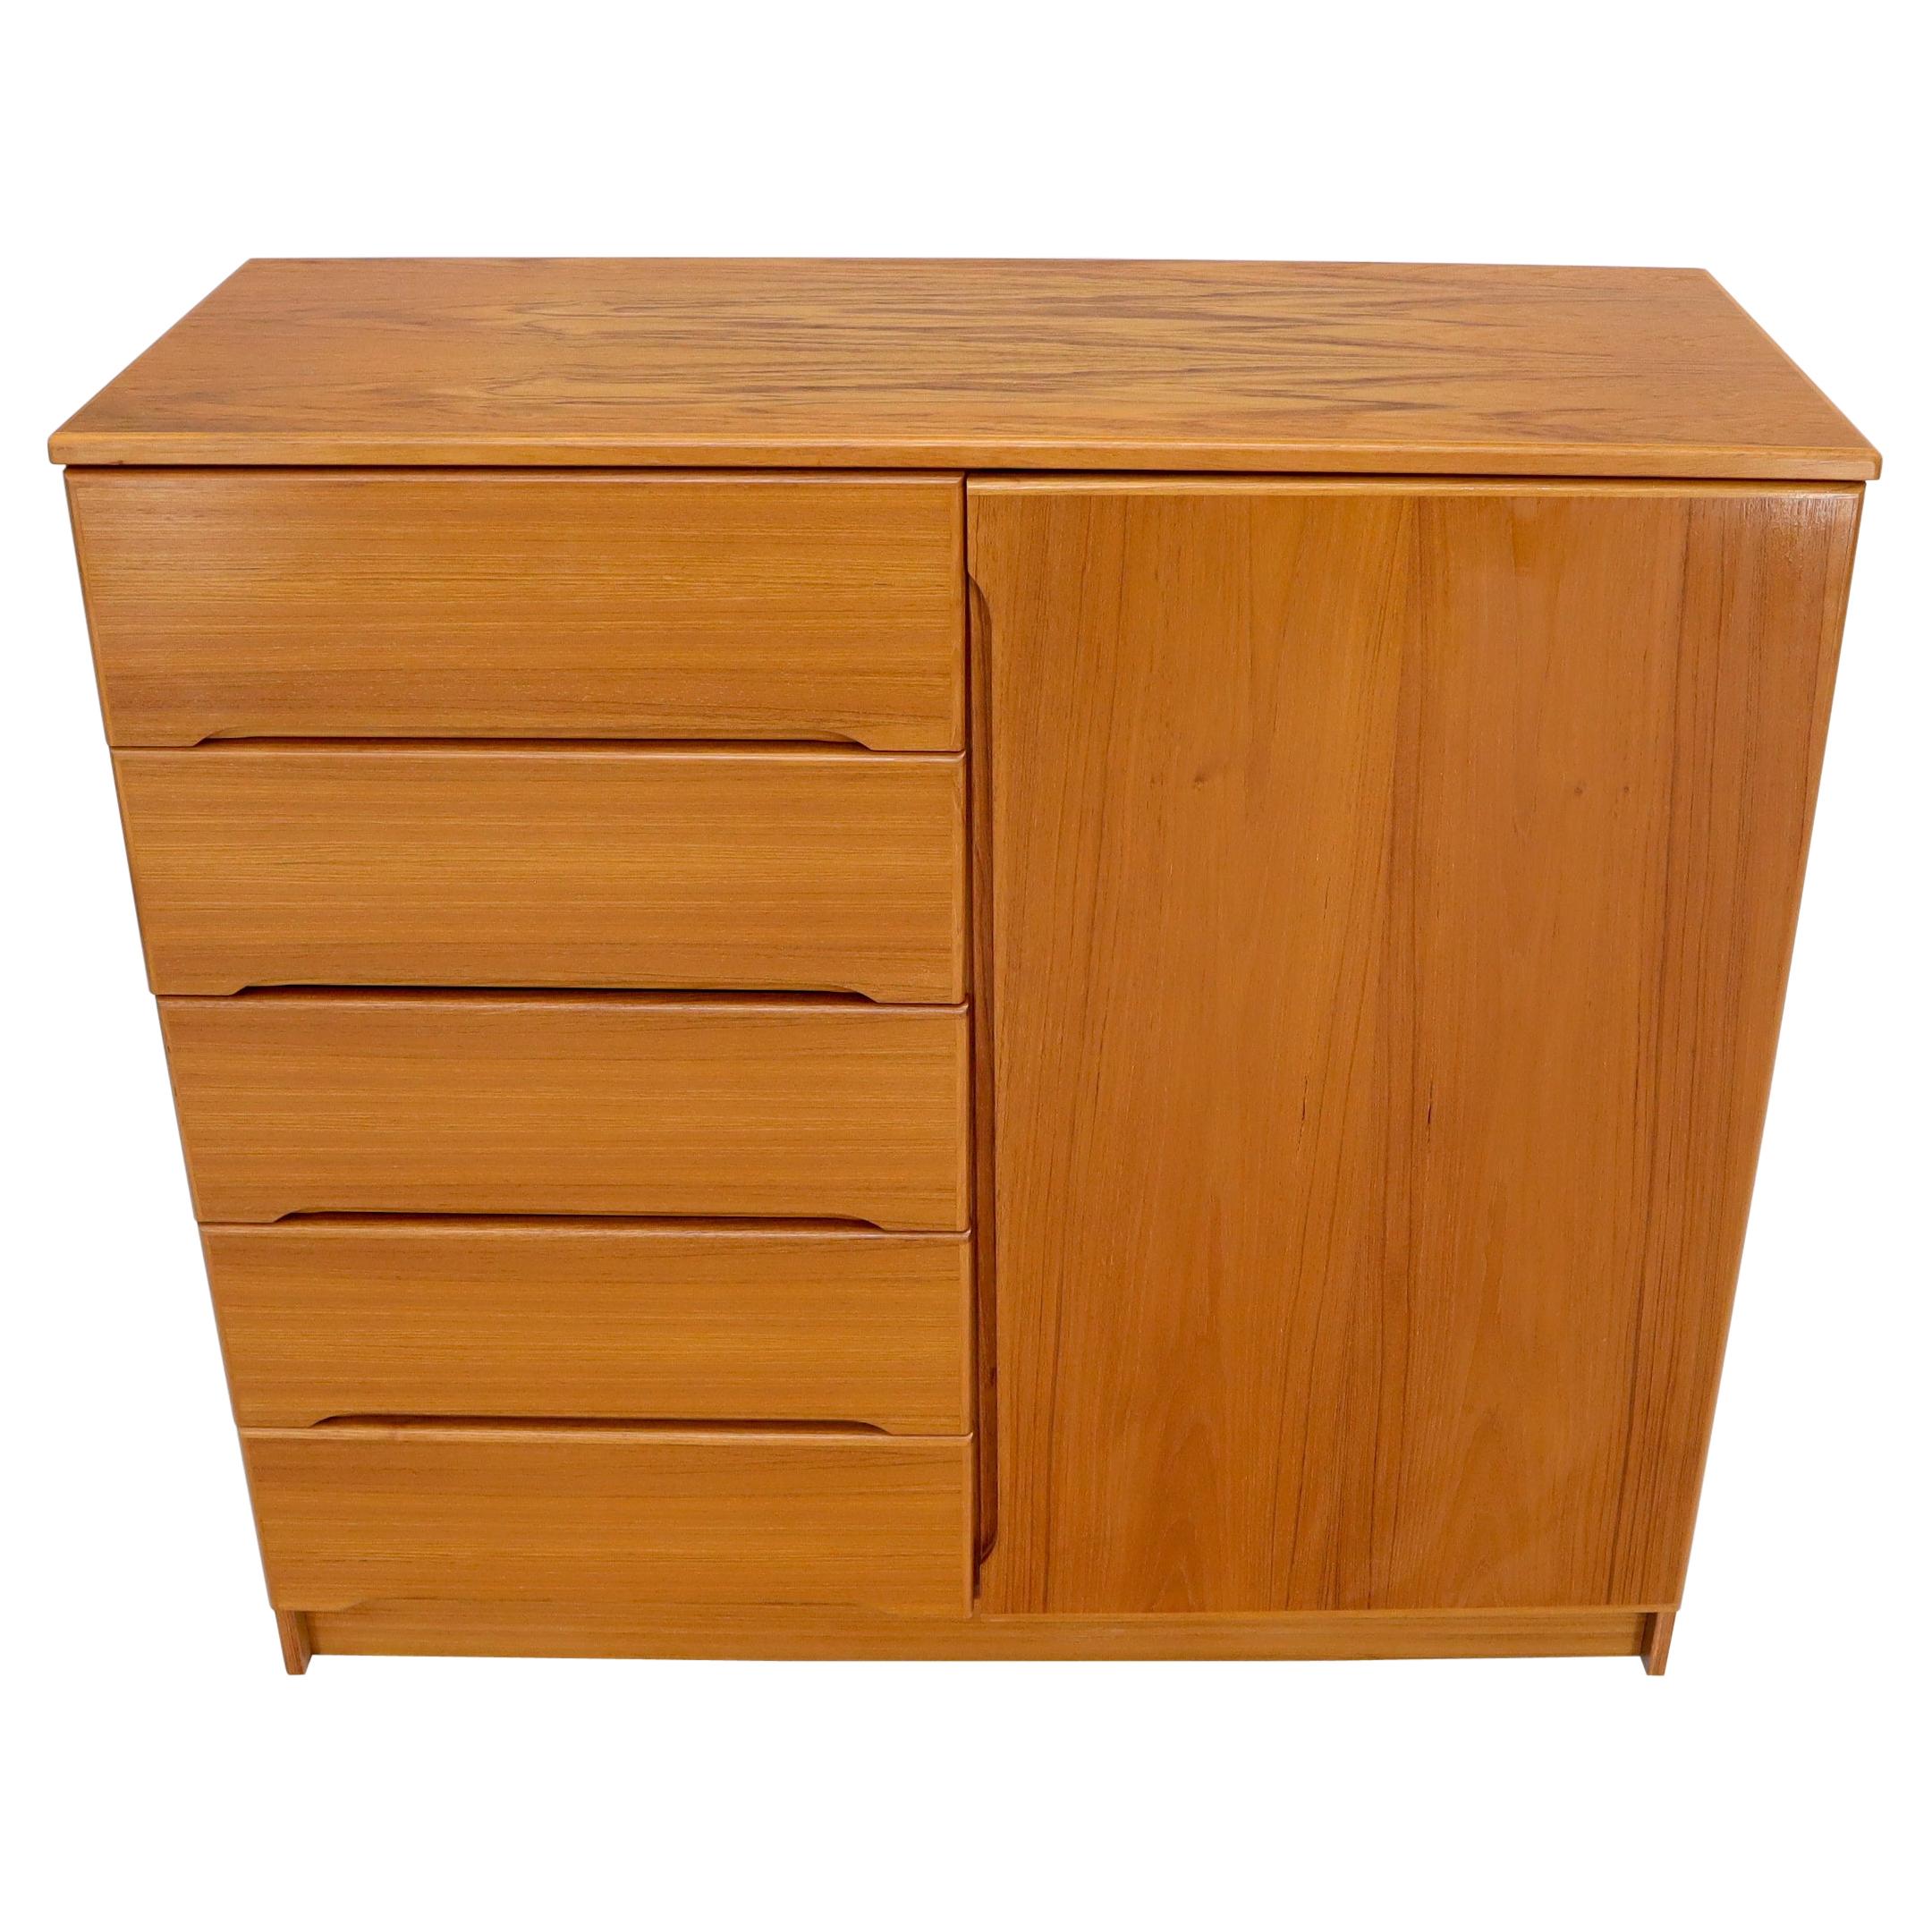 Danish Teak Mid-Century Modern Side by Side Chest of 5 Drawers Door Compartment